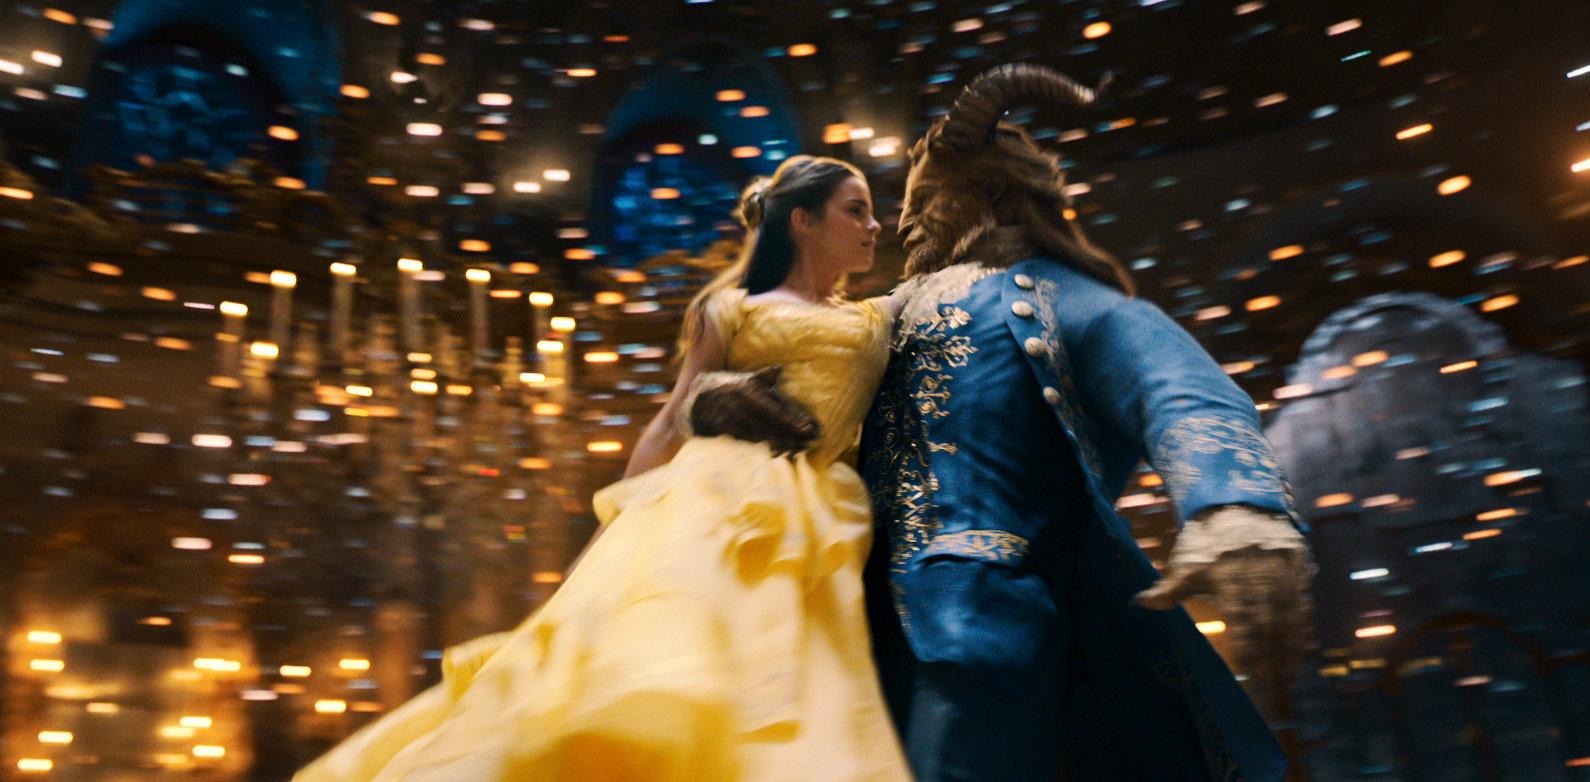 Emma Watson as Belle with Dan Stevens' Beast in Disney's Beauty and the Beast live-action remake.